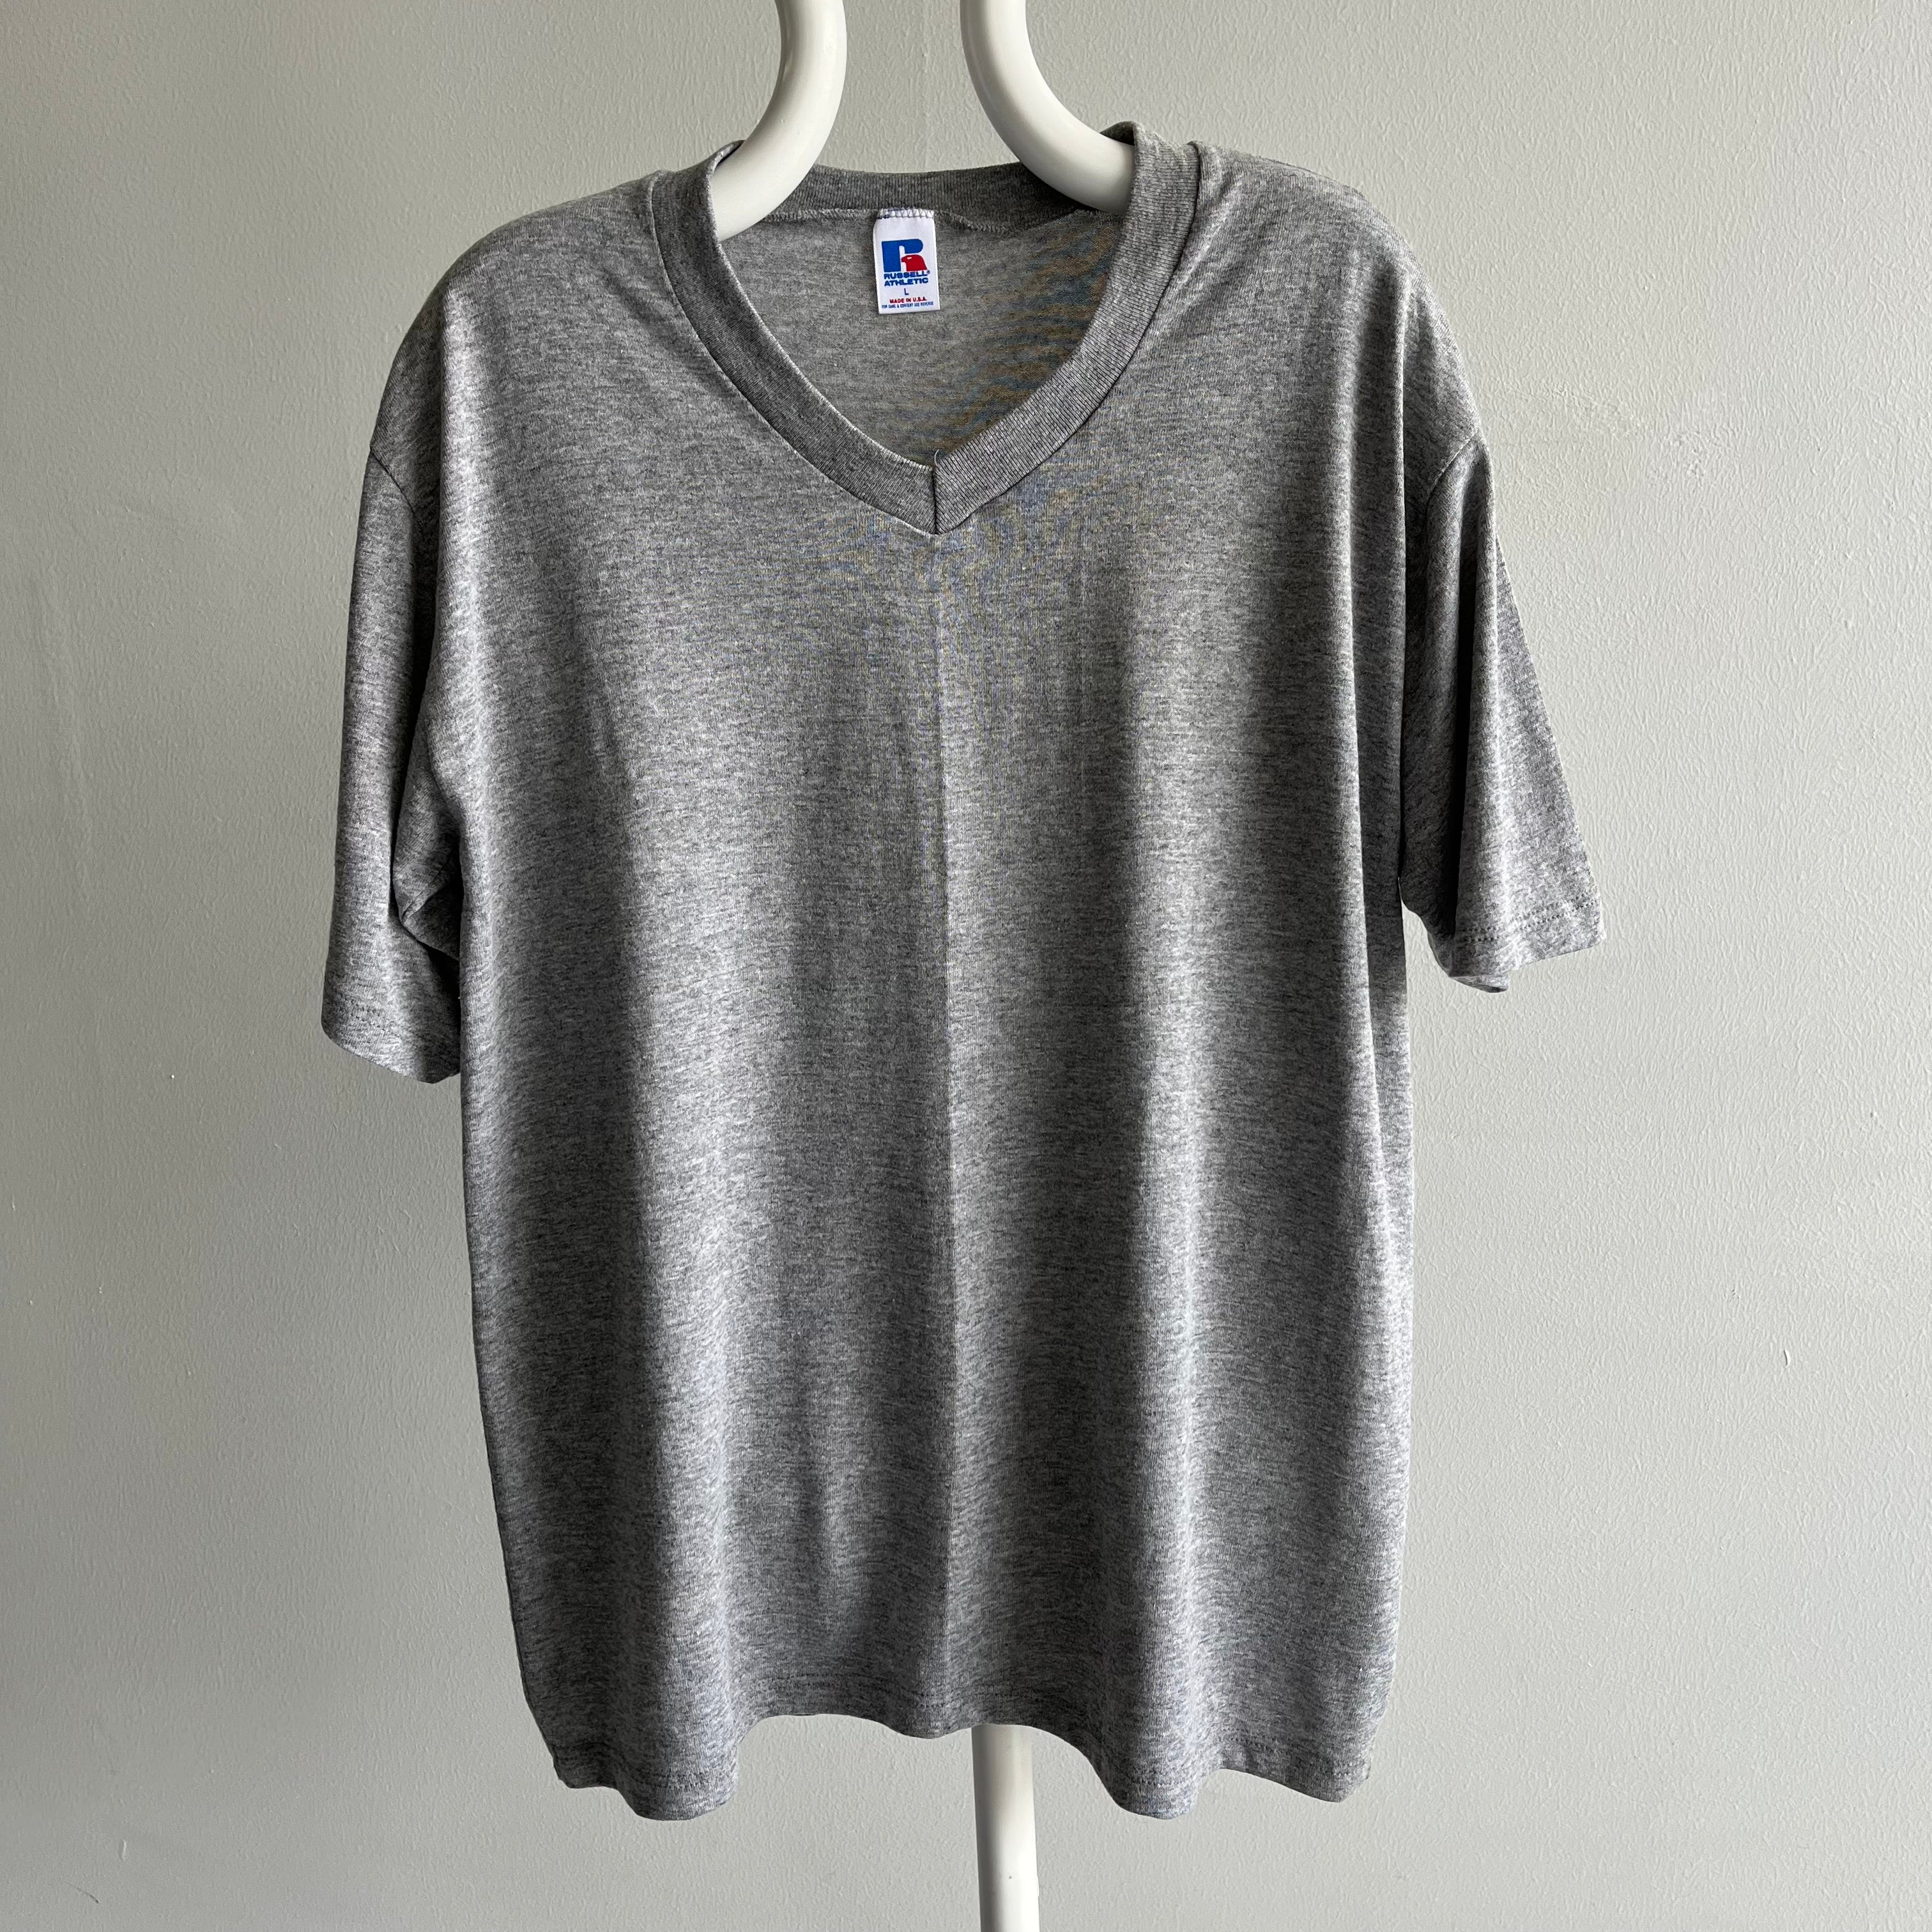 1980/90s Russell Brand V-Neck Gray T-Shirt - Classic/Like New